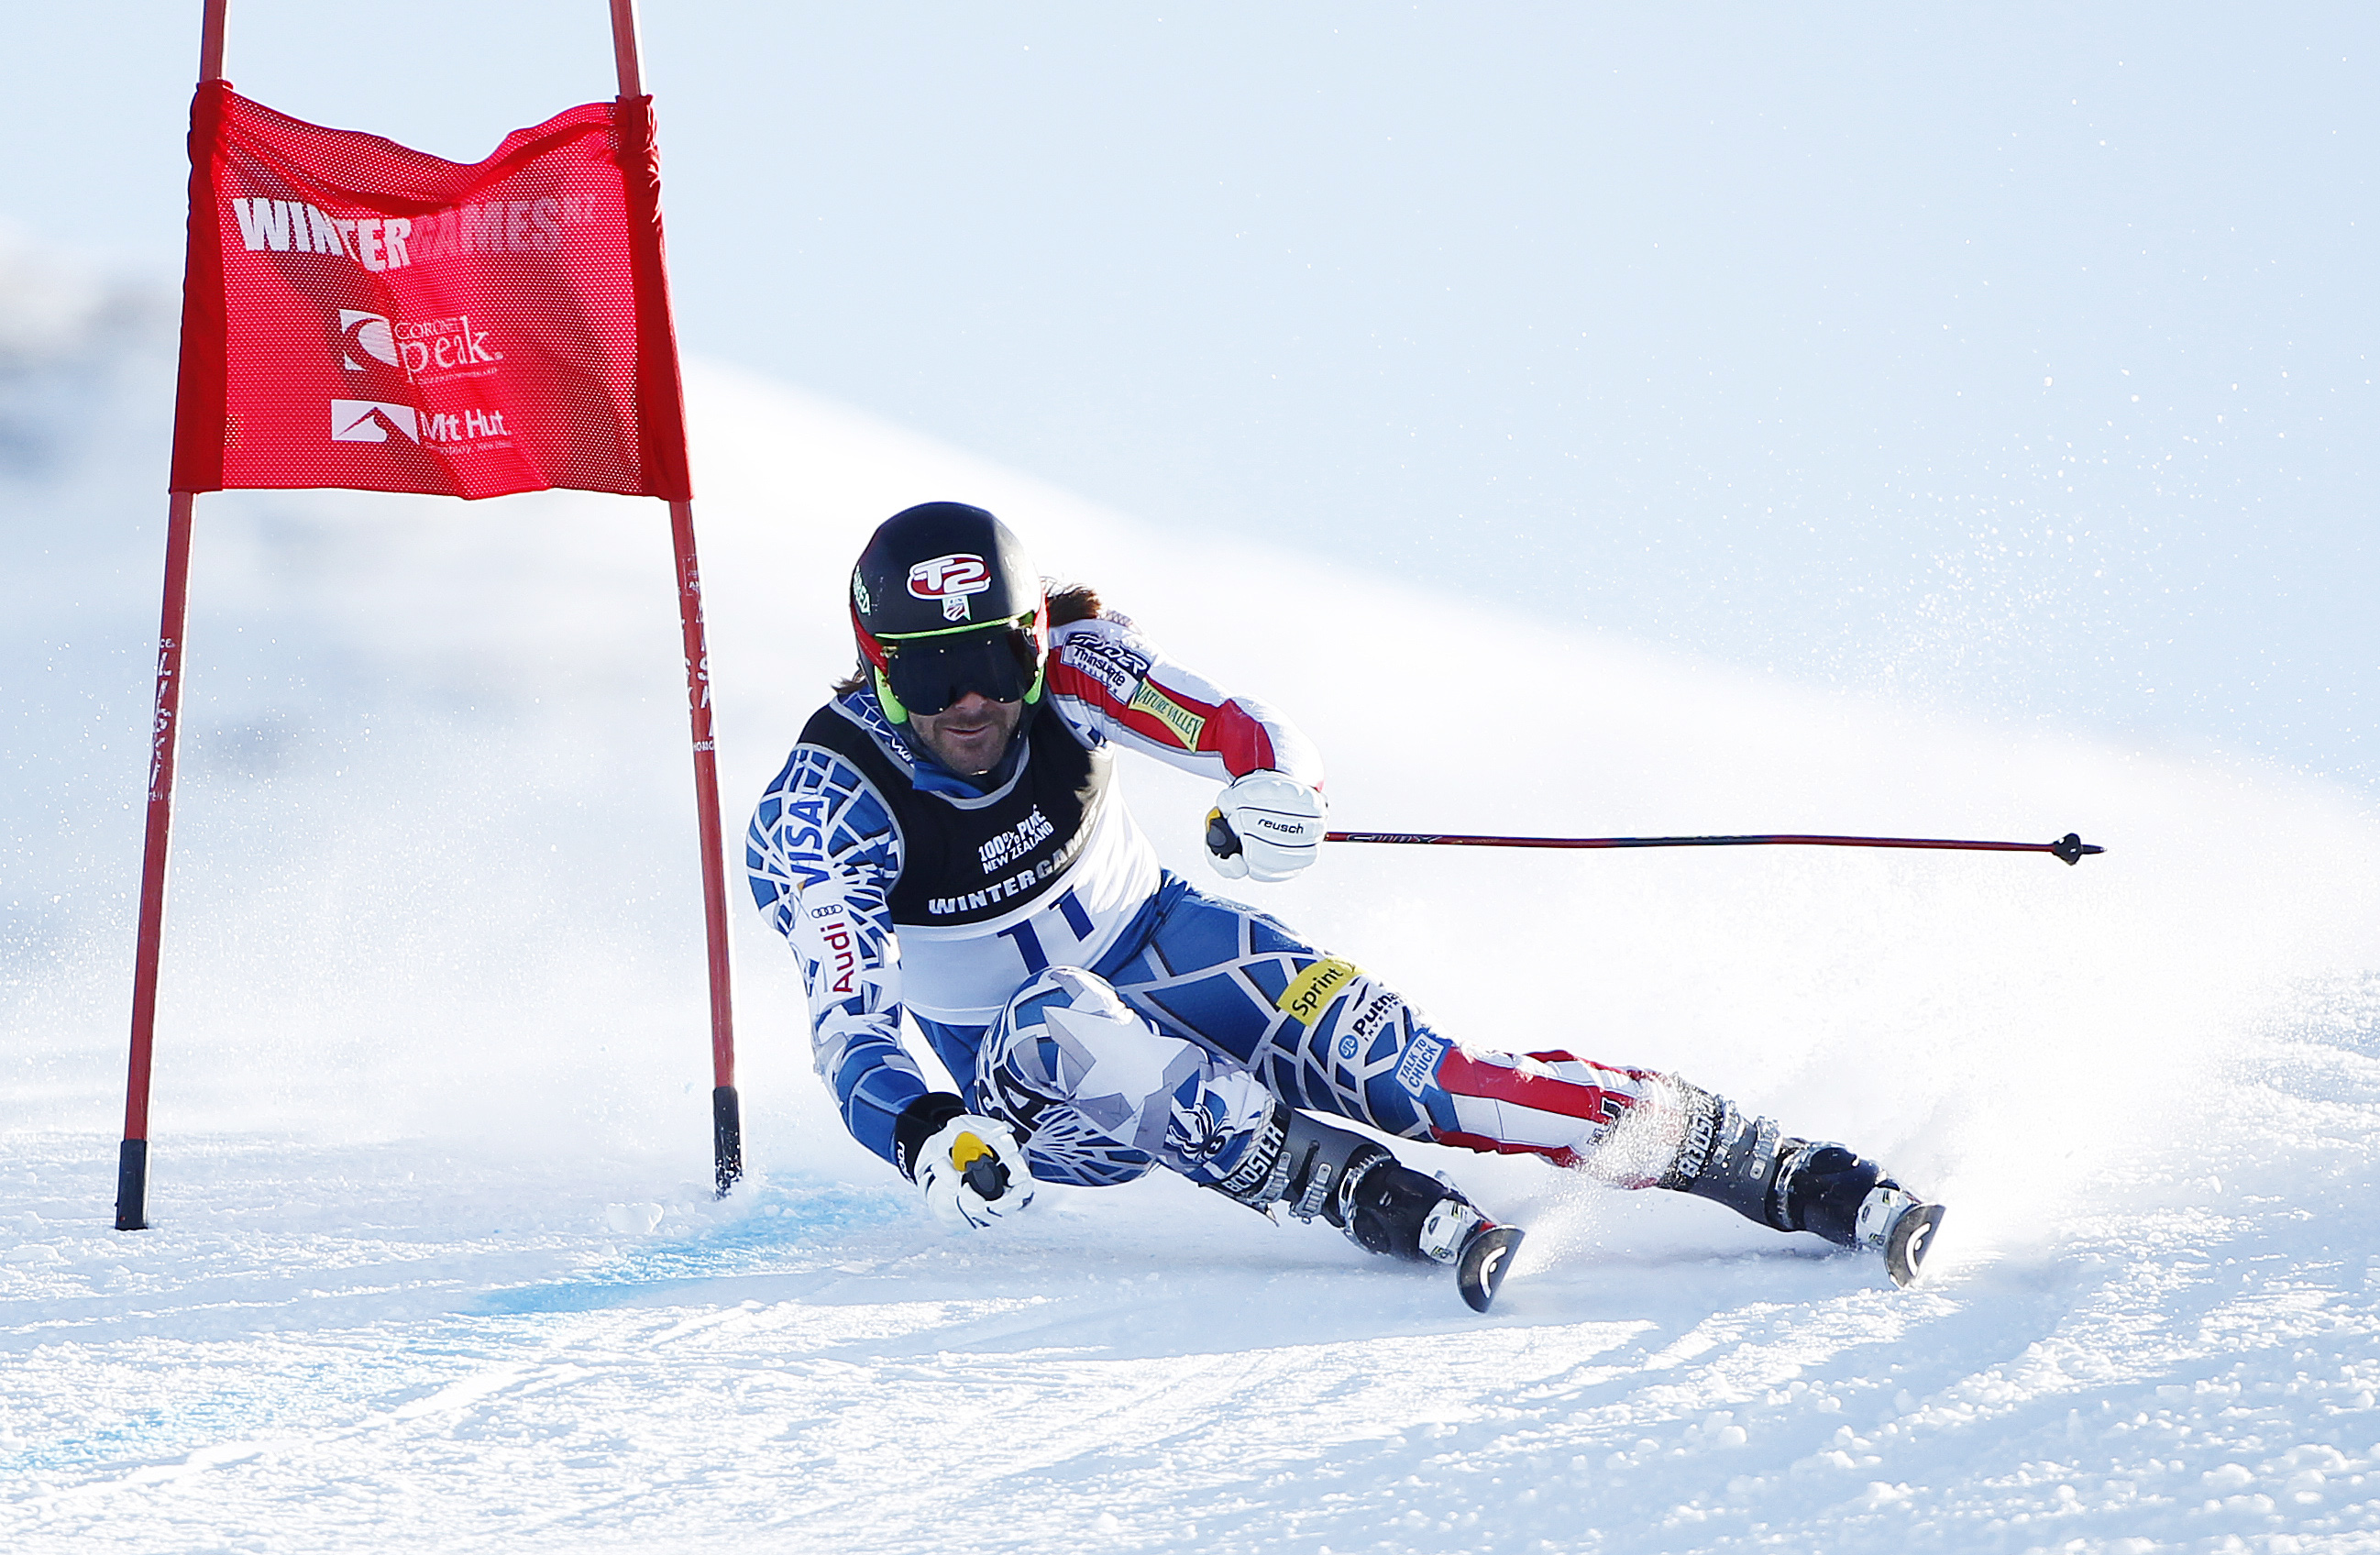 Slalom / Mikaela Shiffrin Is Second At Levi Slalom In First Race Since January / Slalom is a modern consulting firm focused on strategy, technology, and business transformation.